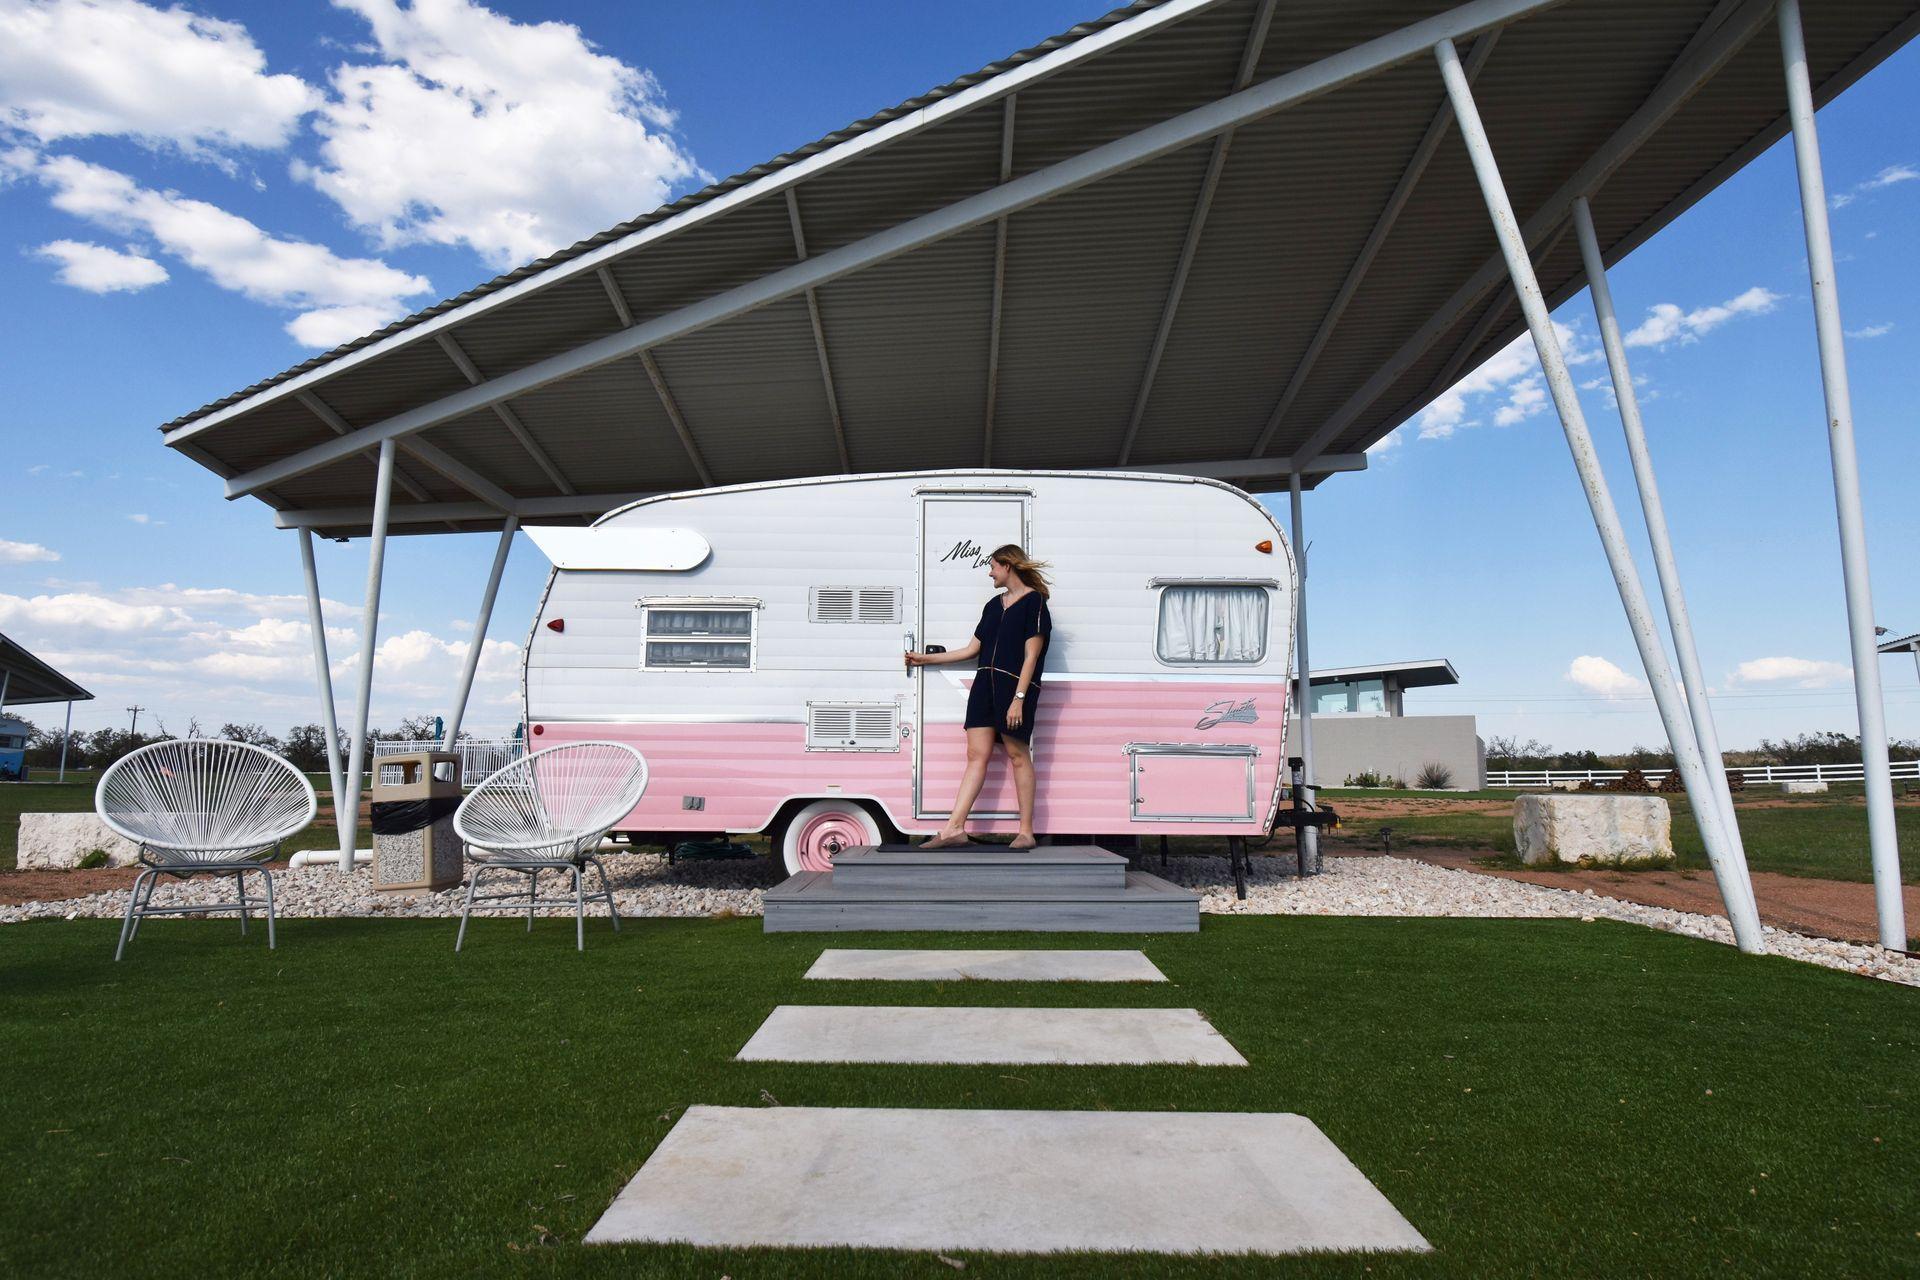 Lydia standing in front of a pink and white trailer at the Blue Skies Retro Resort.